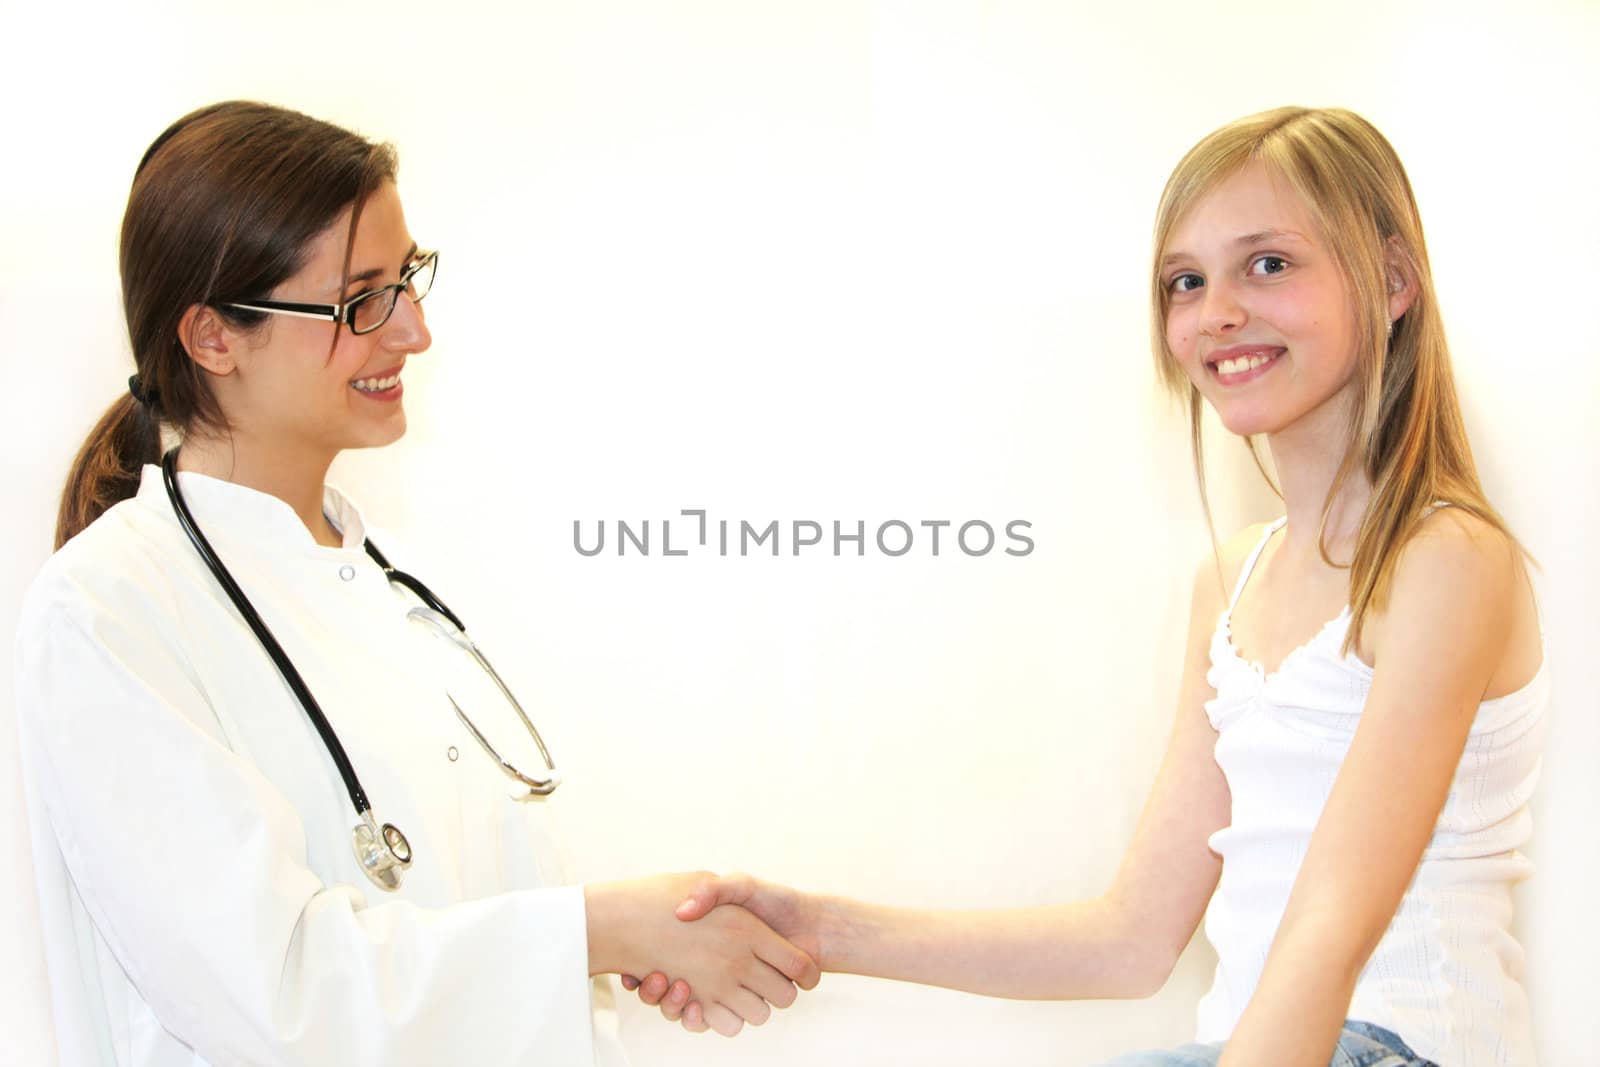 Girl with doctor shaking hands - both smiling-Copy Space and white background